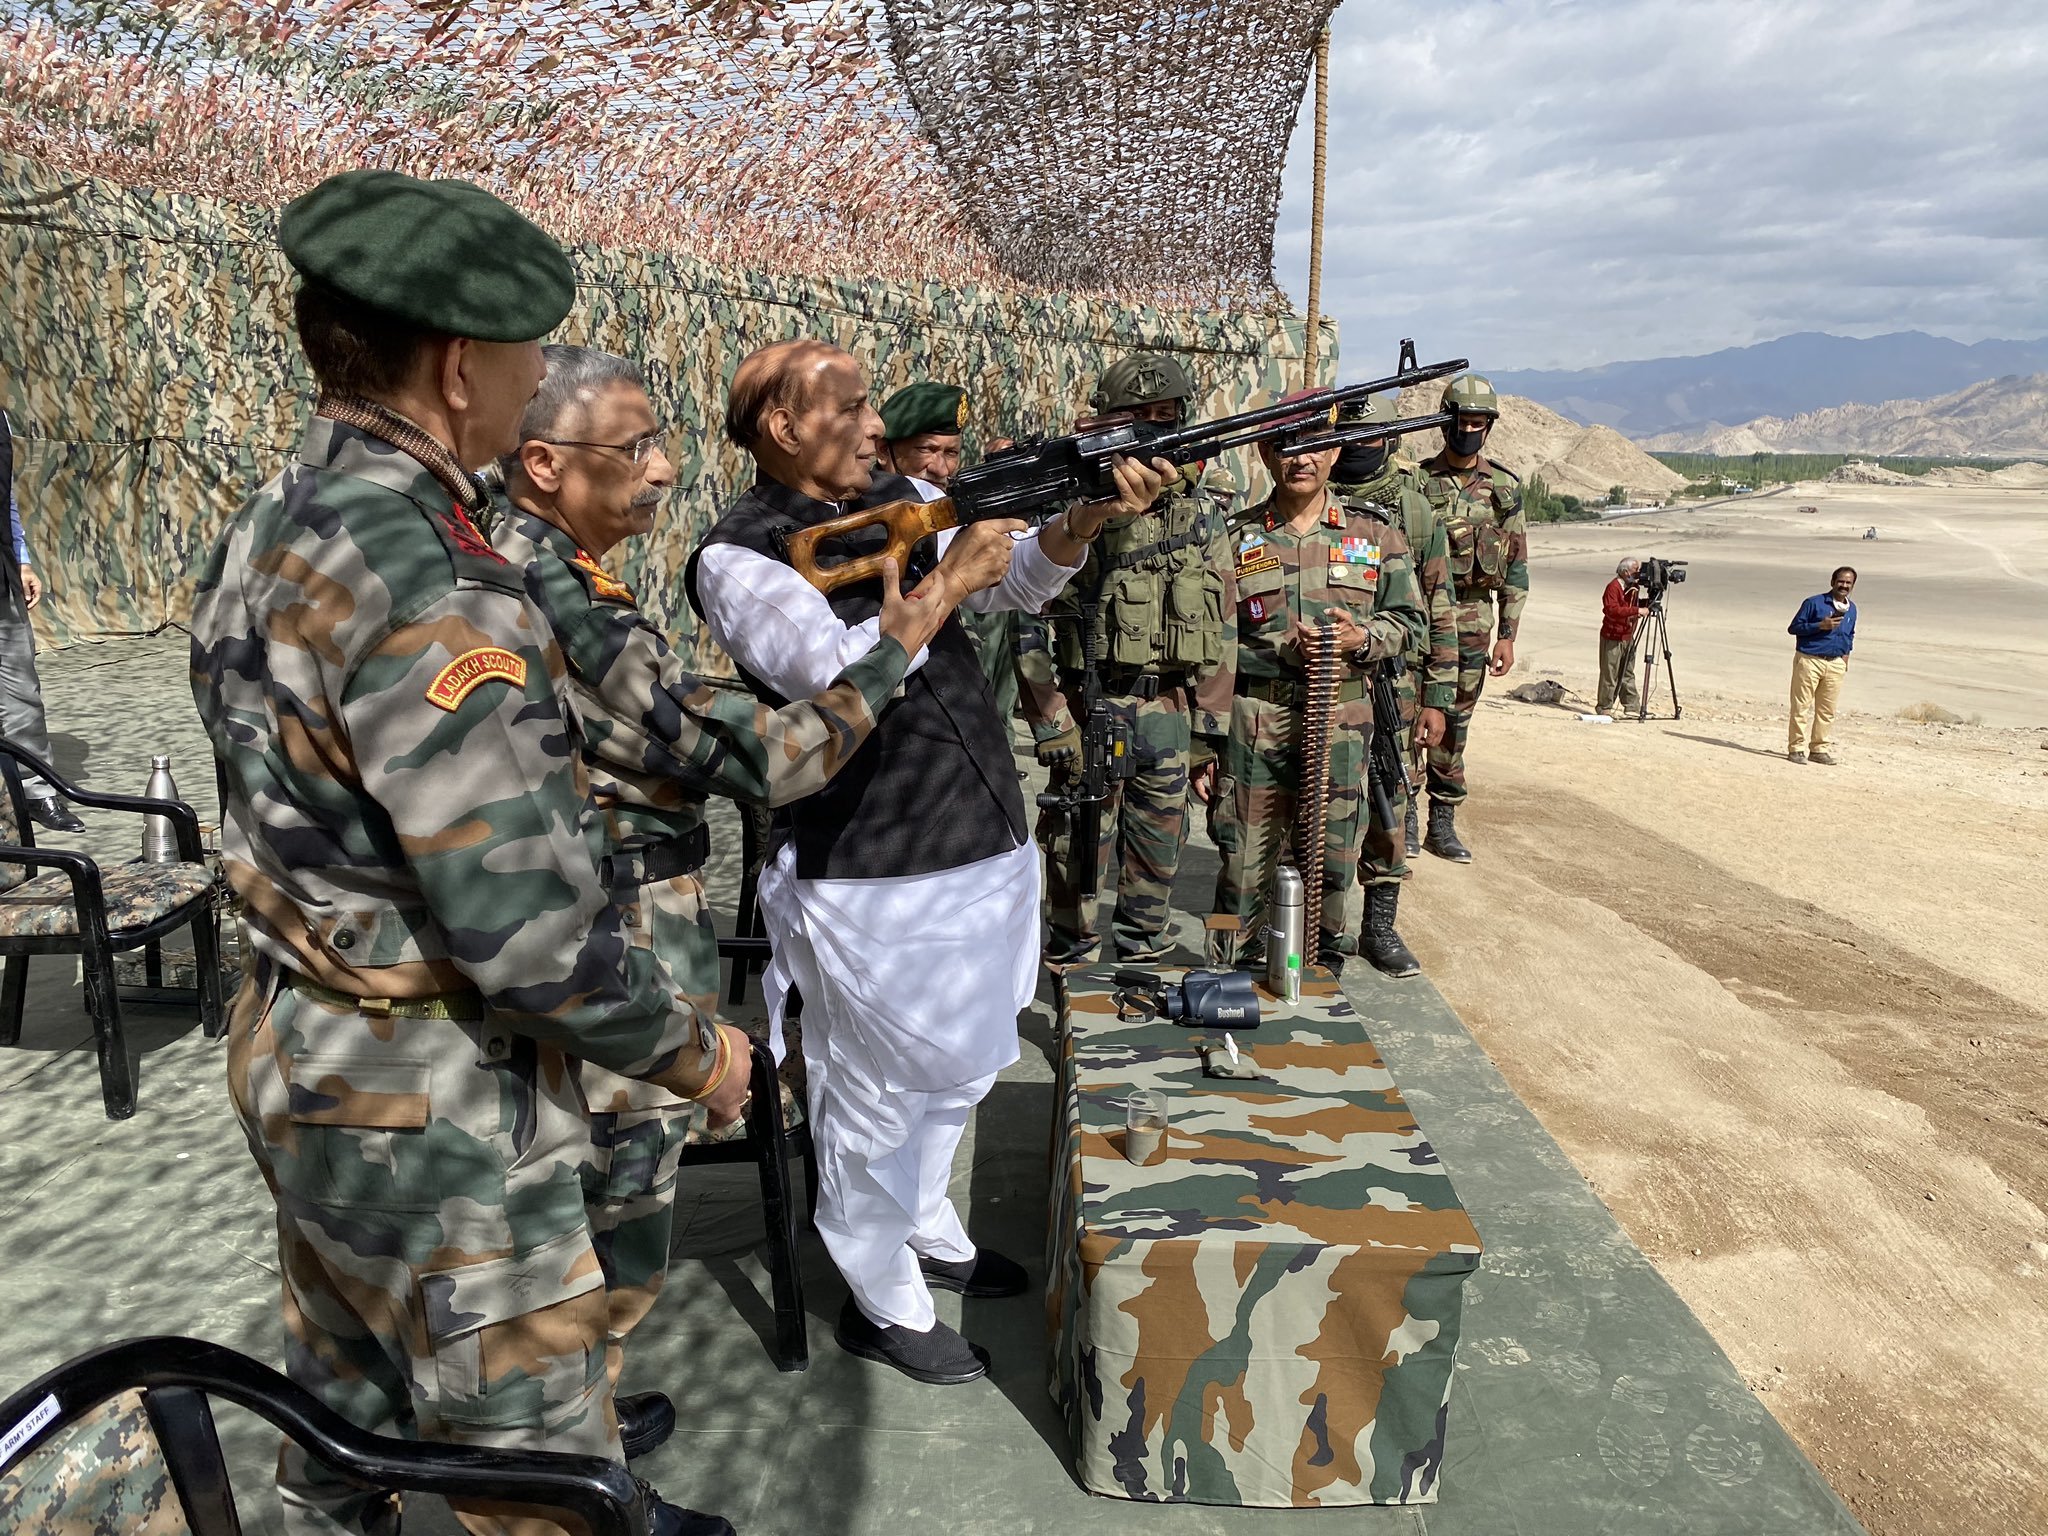 Rajnath Singh witnesses para dropping skills of Armed Forces at Stakna, Leh